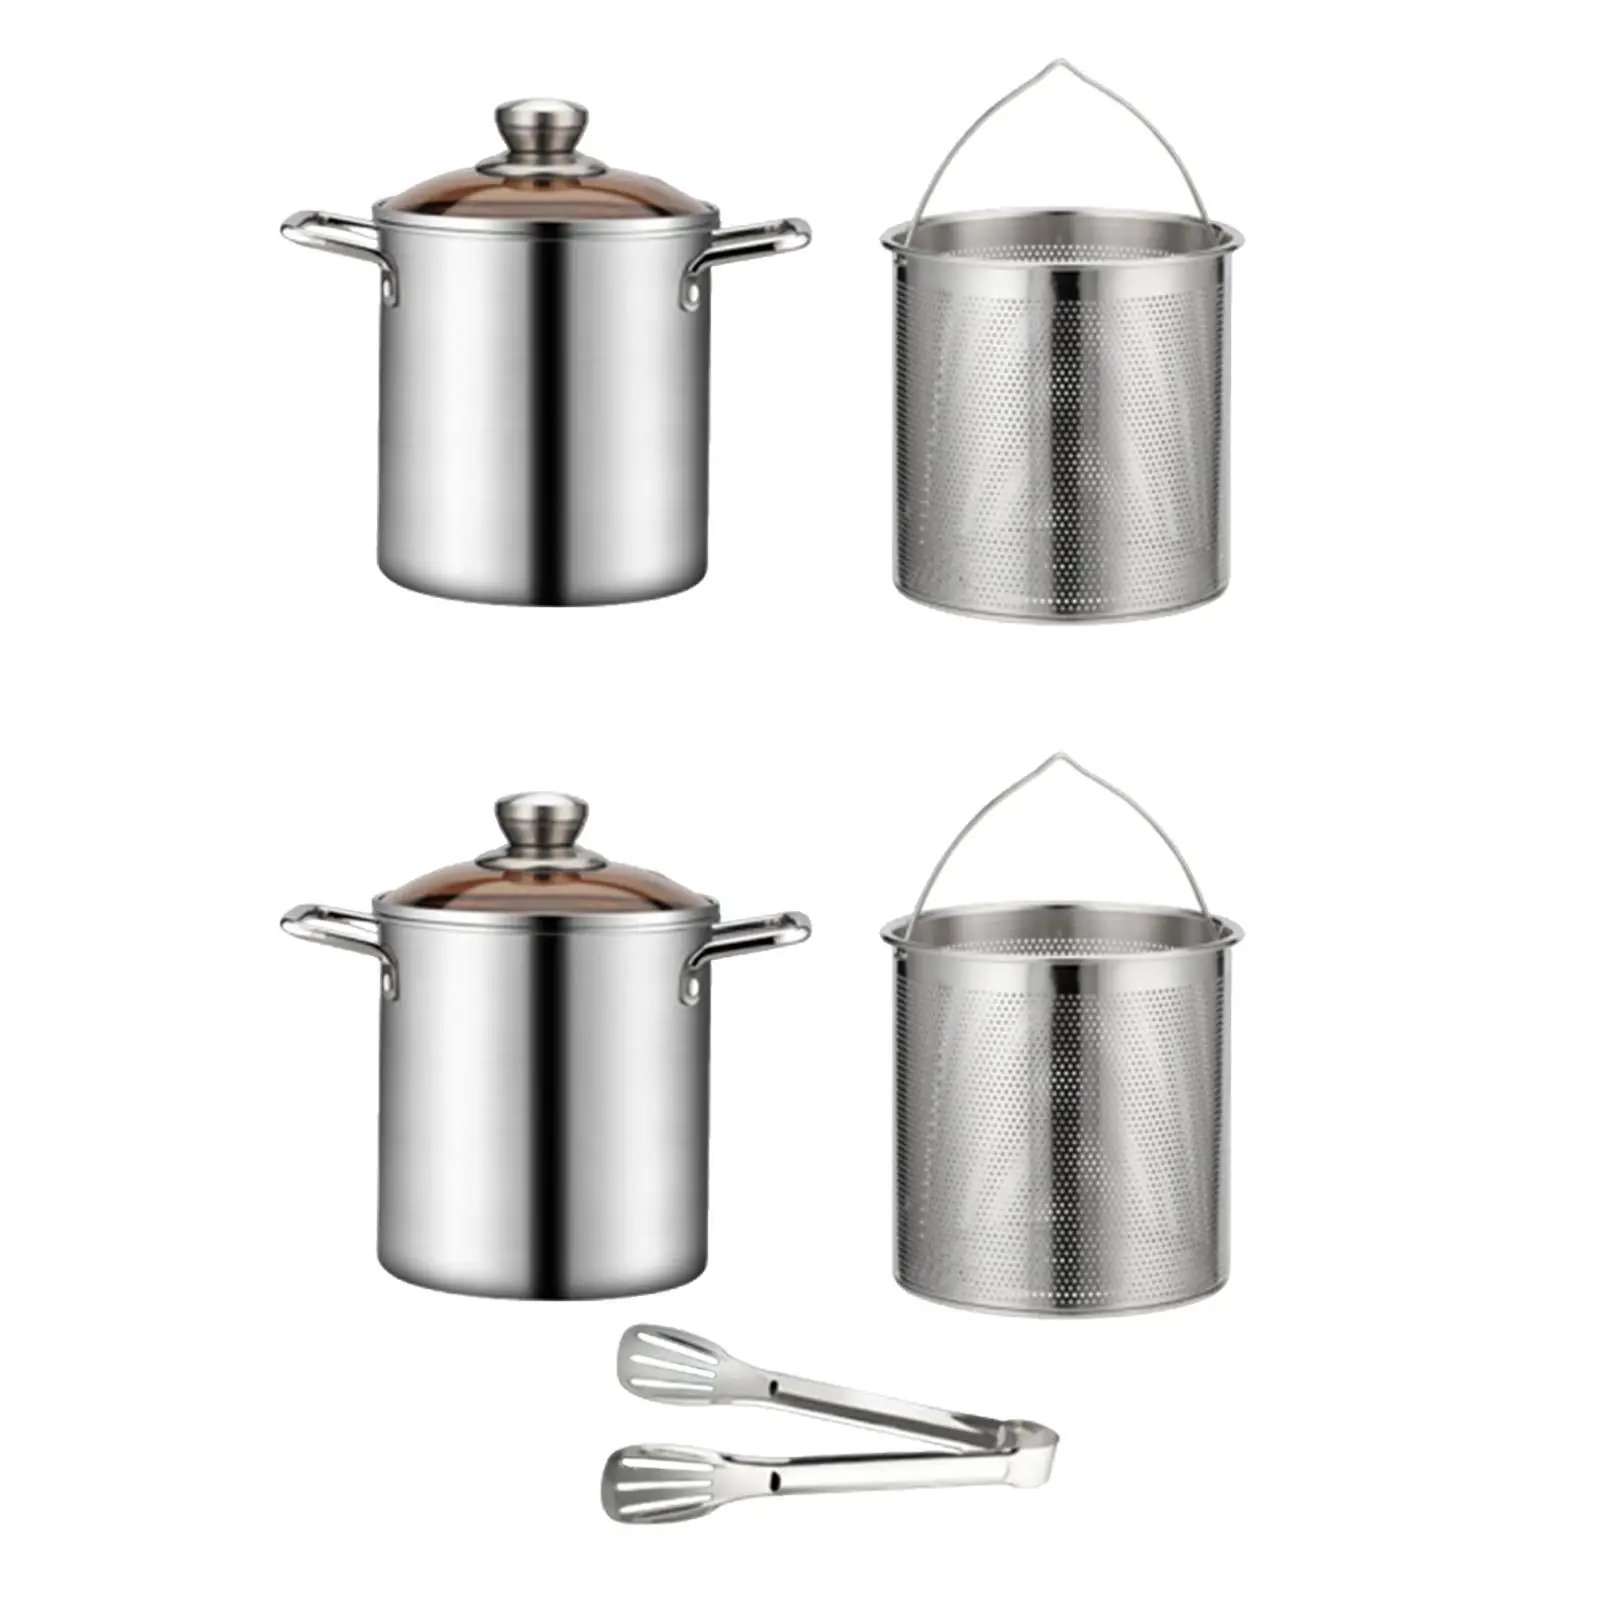 Stainless Steel Stockpot with Basket Clear Glass Lids All Hob Types Use Nonstick Deep Frying Pot Seafood Boil Pot Cooking Pot